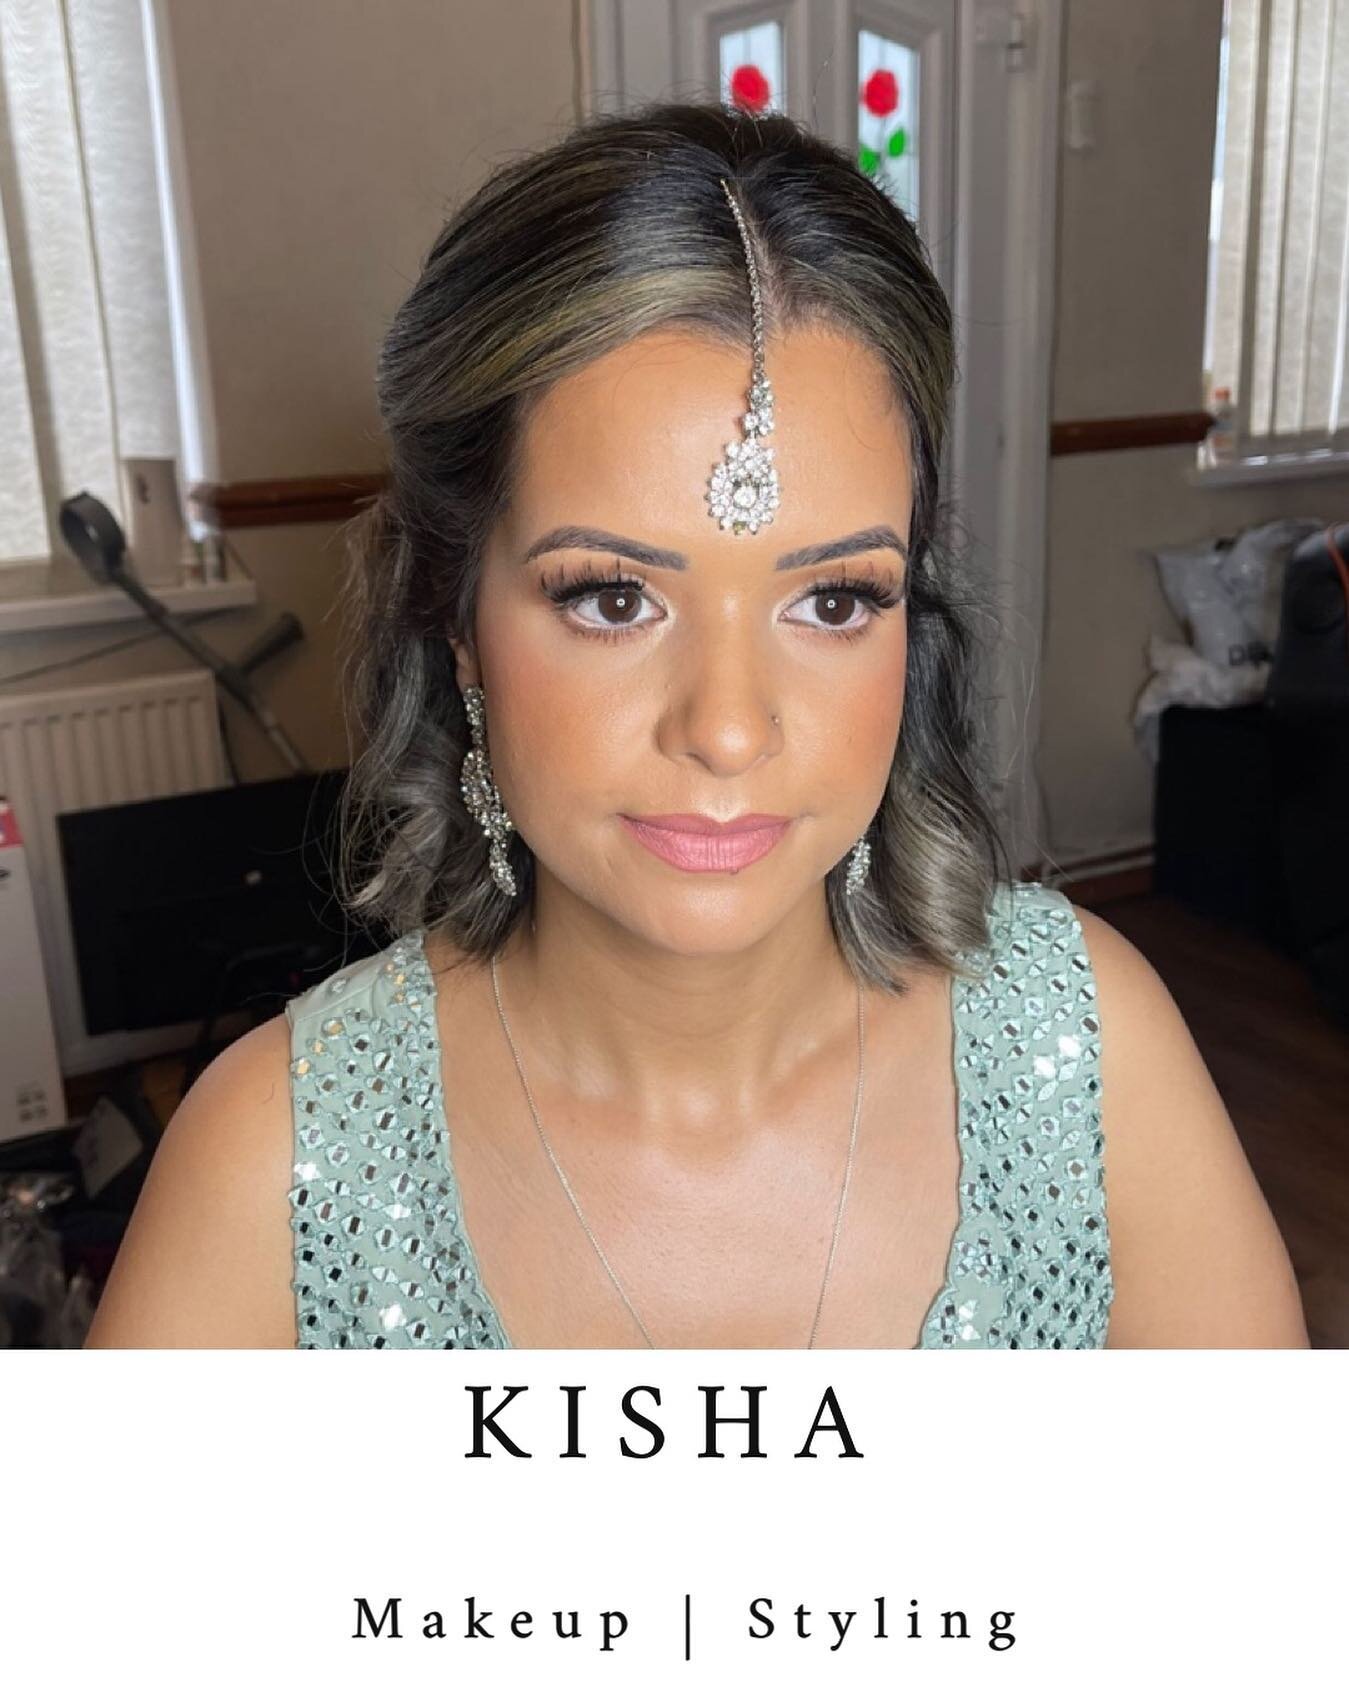 💄Senior MUA: KISHA
📍Location: BIRMINGHAM - available to travel ----------------------------------------------------------------------------------
To BOOK 👉🏽 Email us at promakeuplondonstylists@gmail.com -------------------------------------------